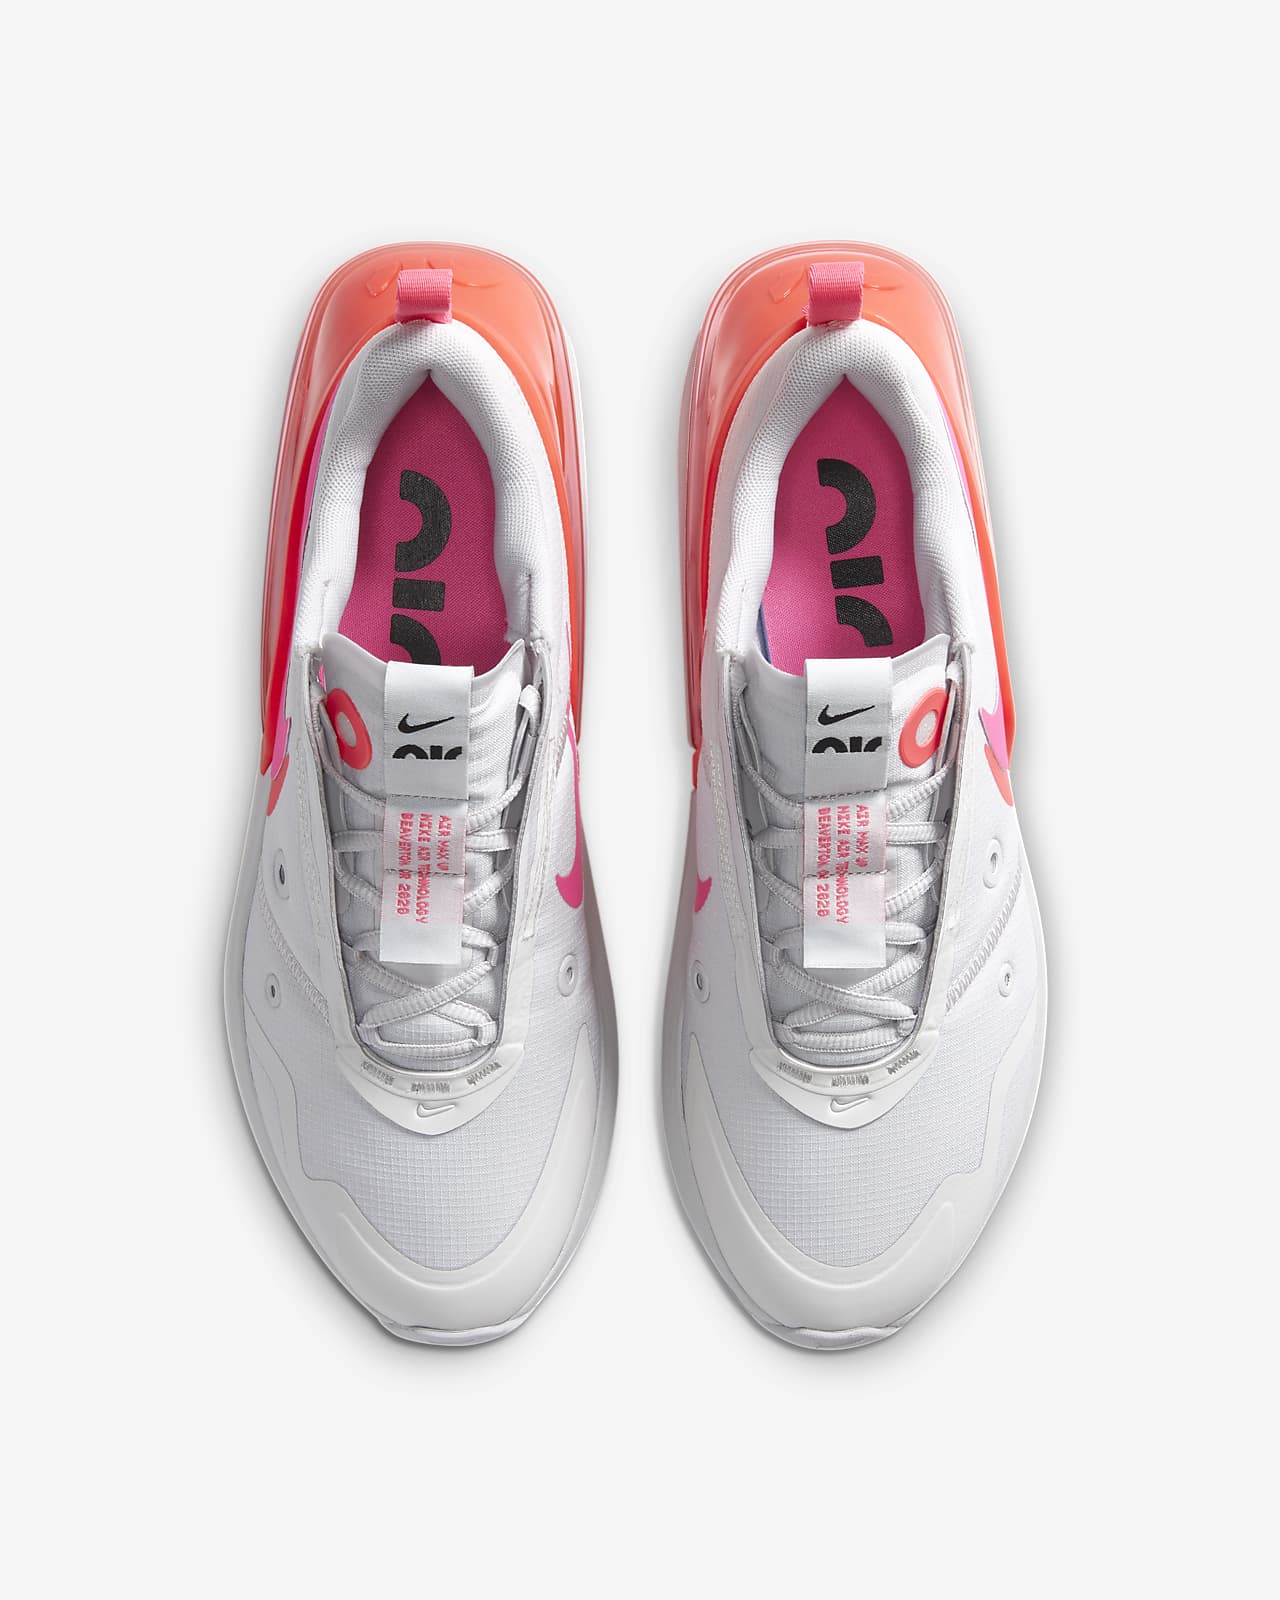 pink air nike shoes